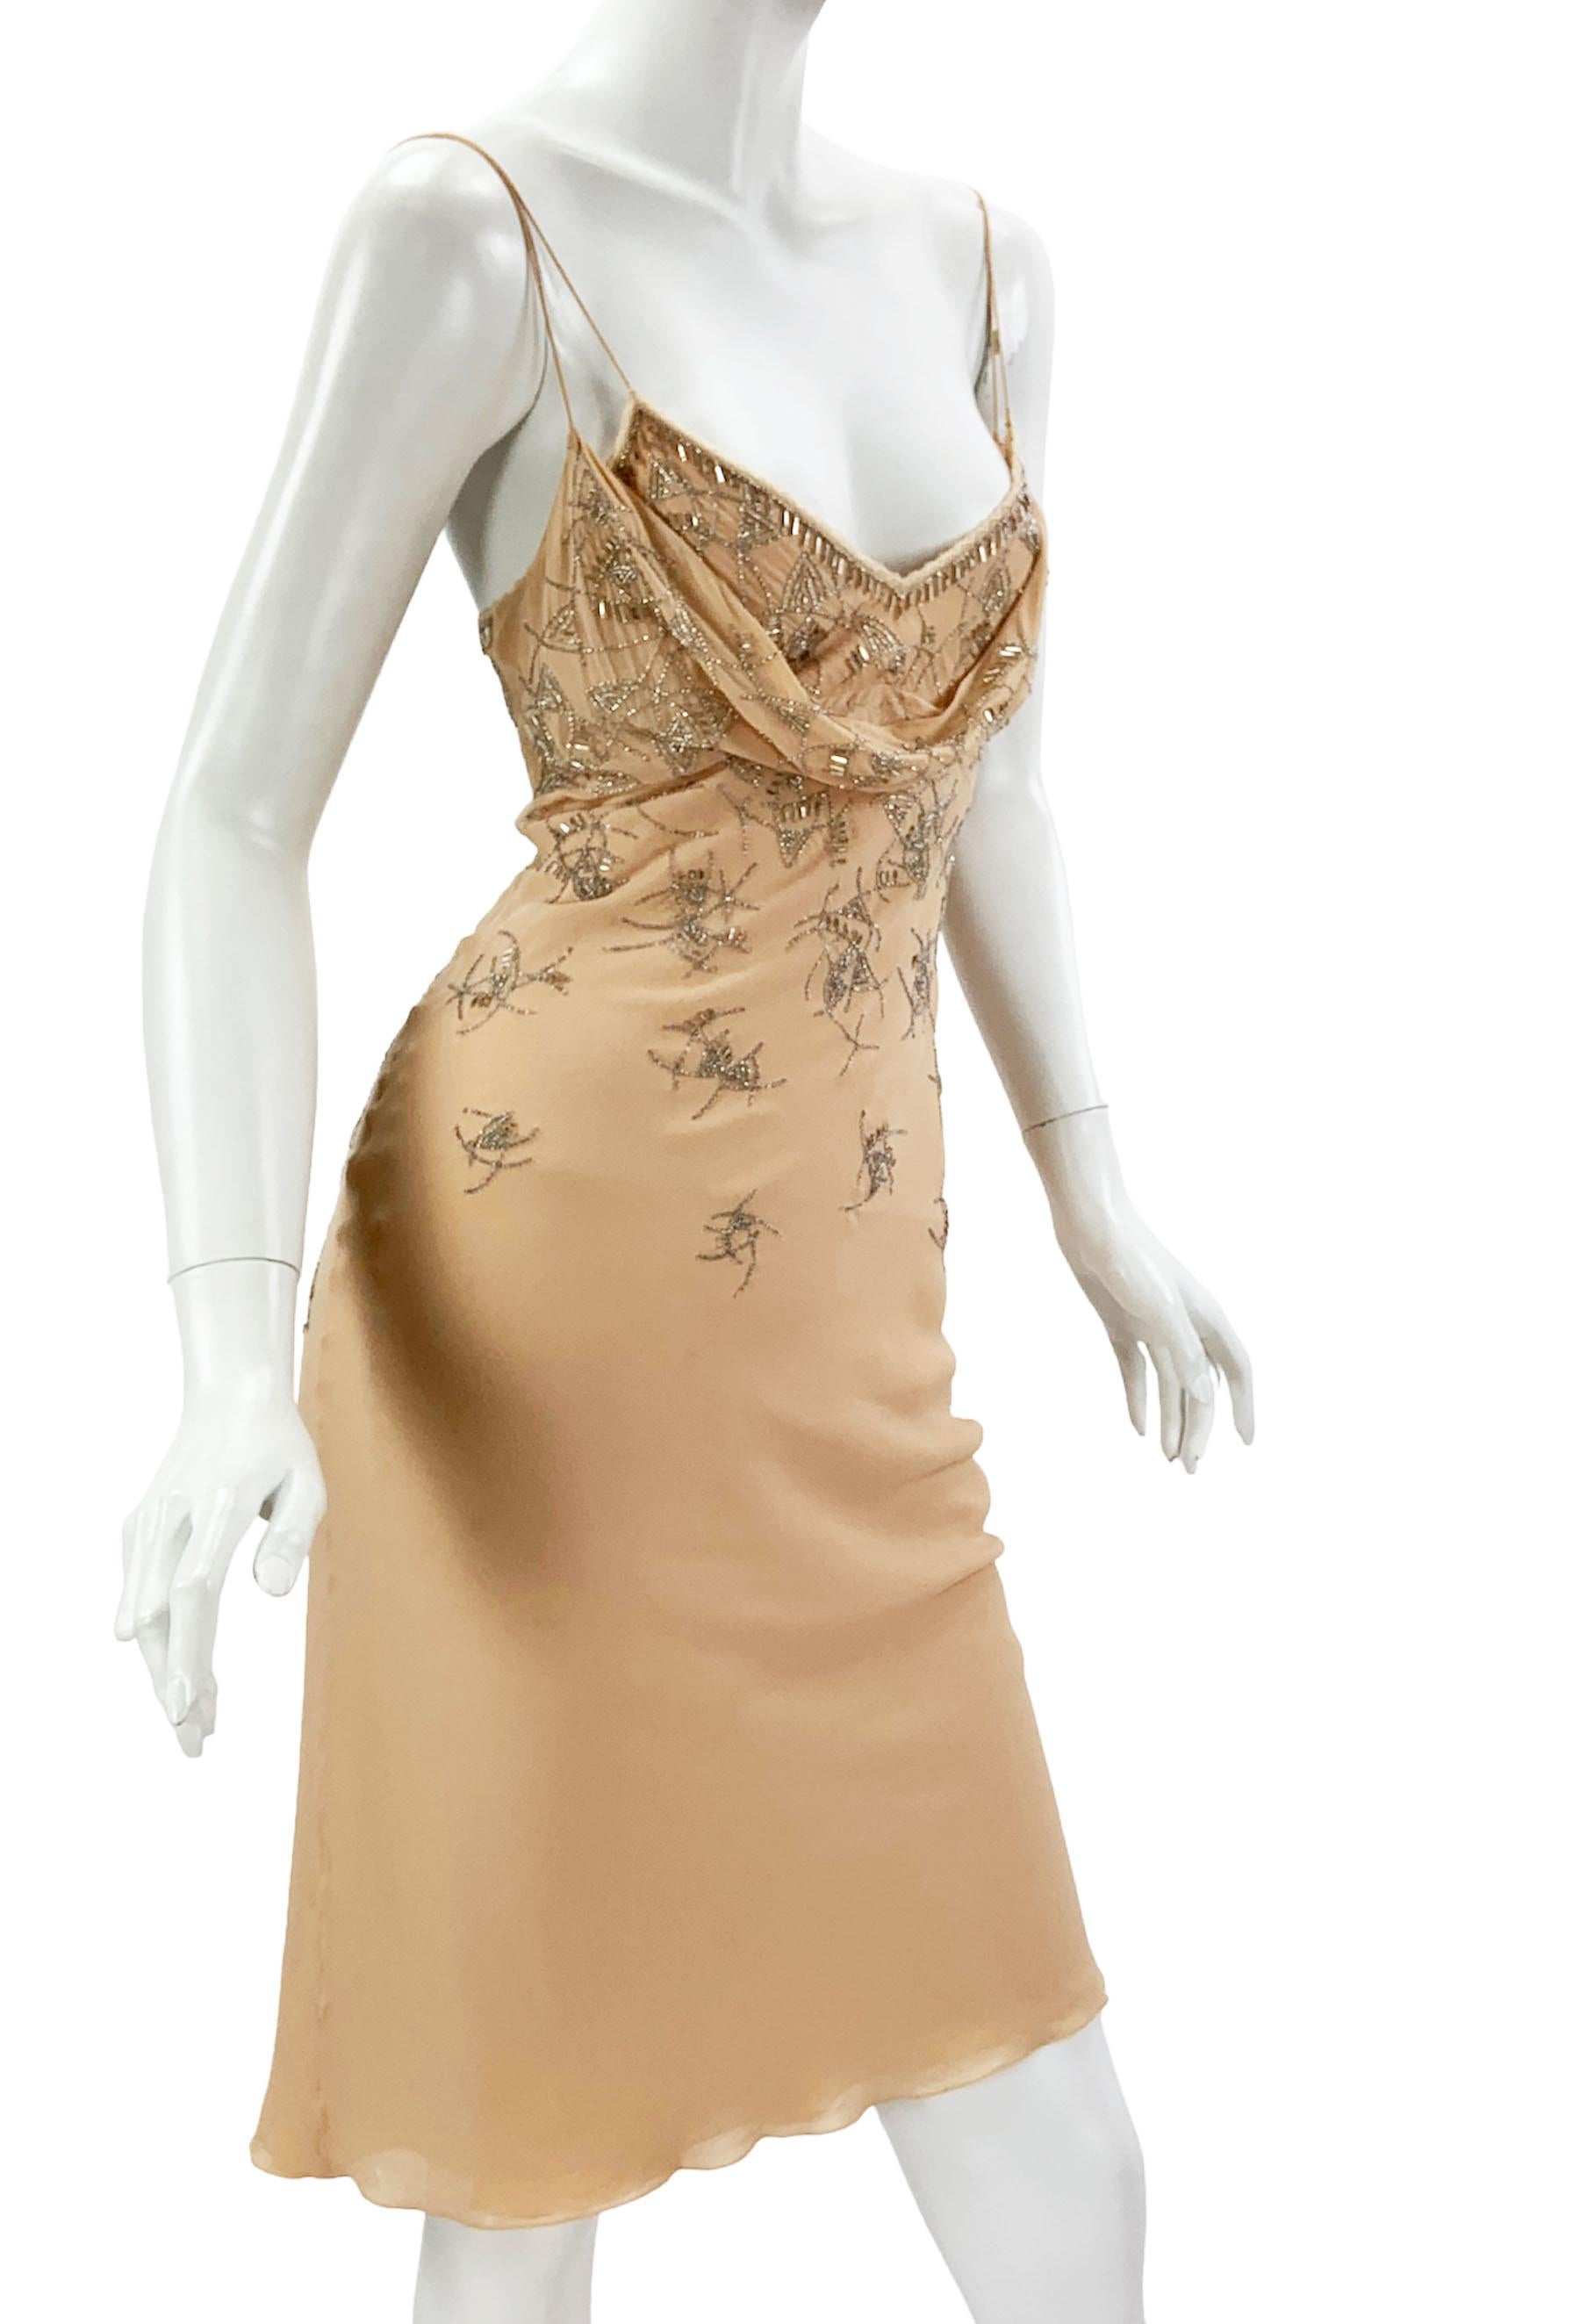 Vintage Christian Dior by John Galliano Silk Embellished Dress
2005 Collection
French sizes available 36 and 42 ( US 4 and 10).
Silver tone beads over the beige silk, Signature Galliano little buttons closure, Spaghetti straps, Cowl neckline, Fully